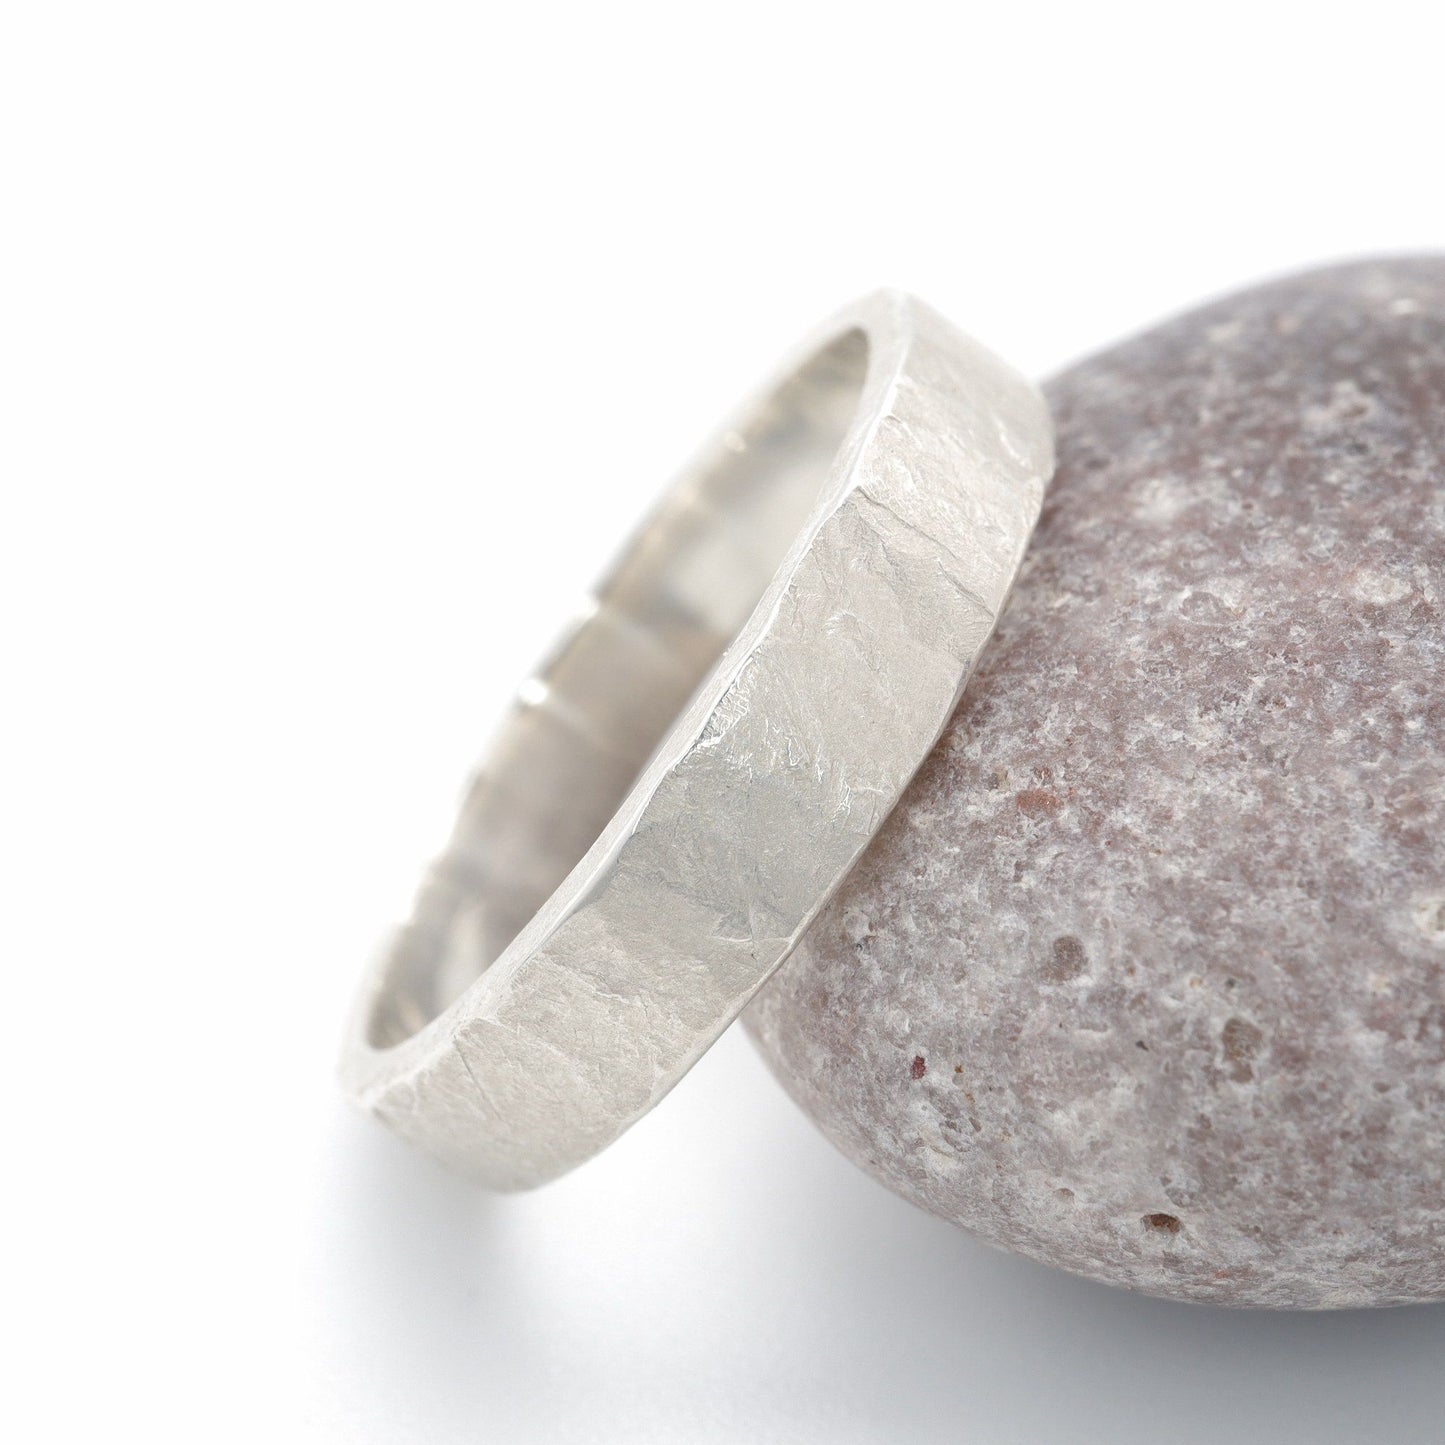 Silver thin wedding ring - rustic flat hammered textured band - Windermere design.